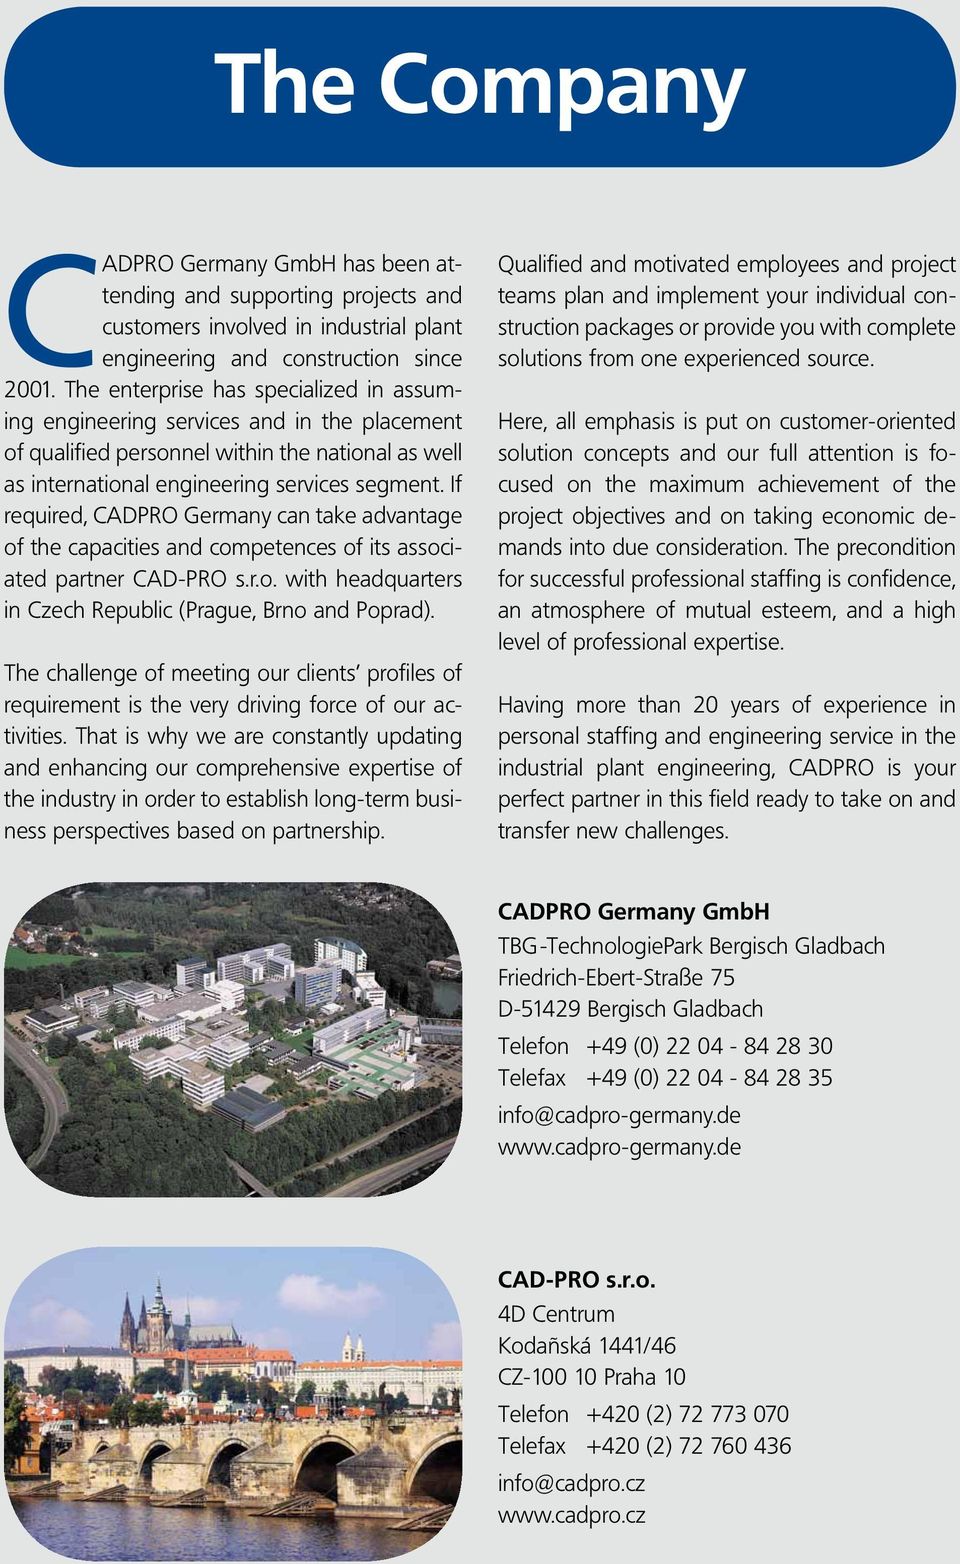 If required, CADPRO Germany can take advantage of the capacities and competences of its associated partner CAD-PRO s.r.o. with headquarters in Czech Republic (Prague, Brno and Poprad).